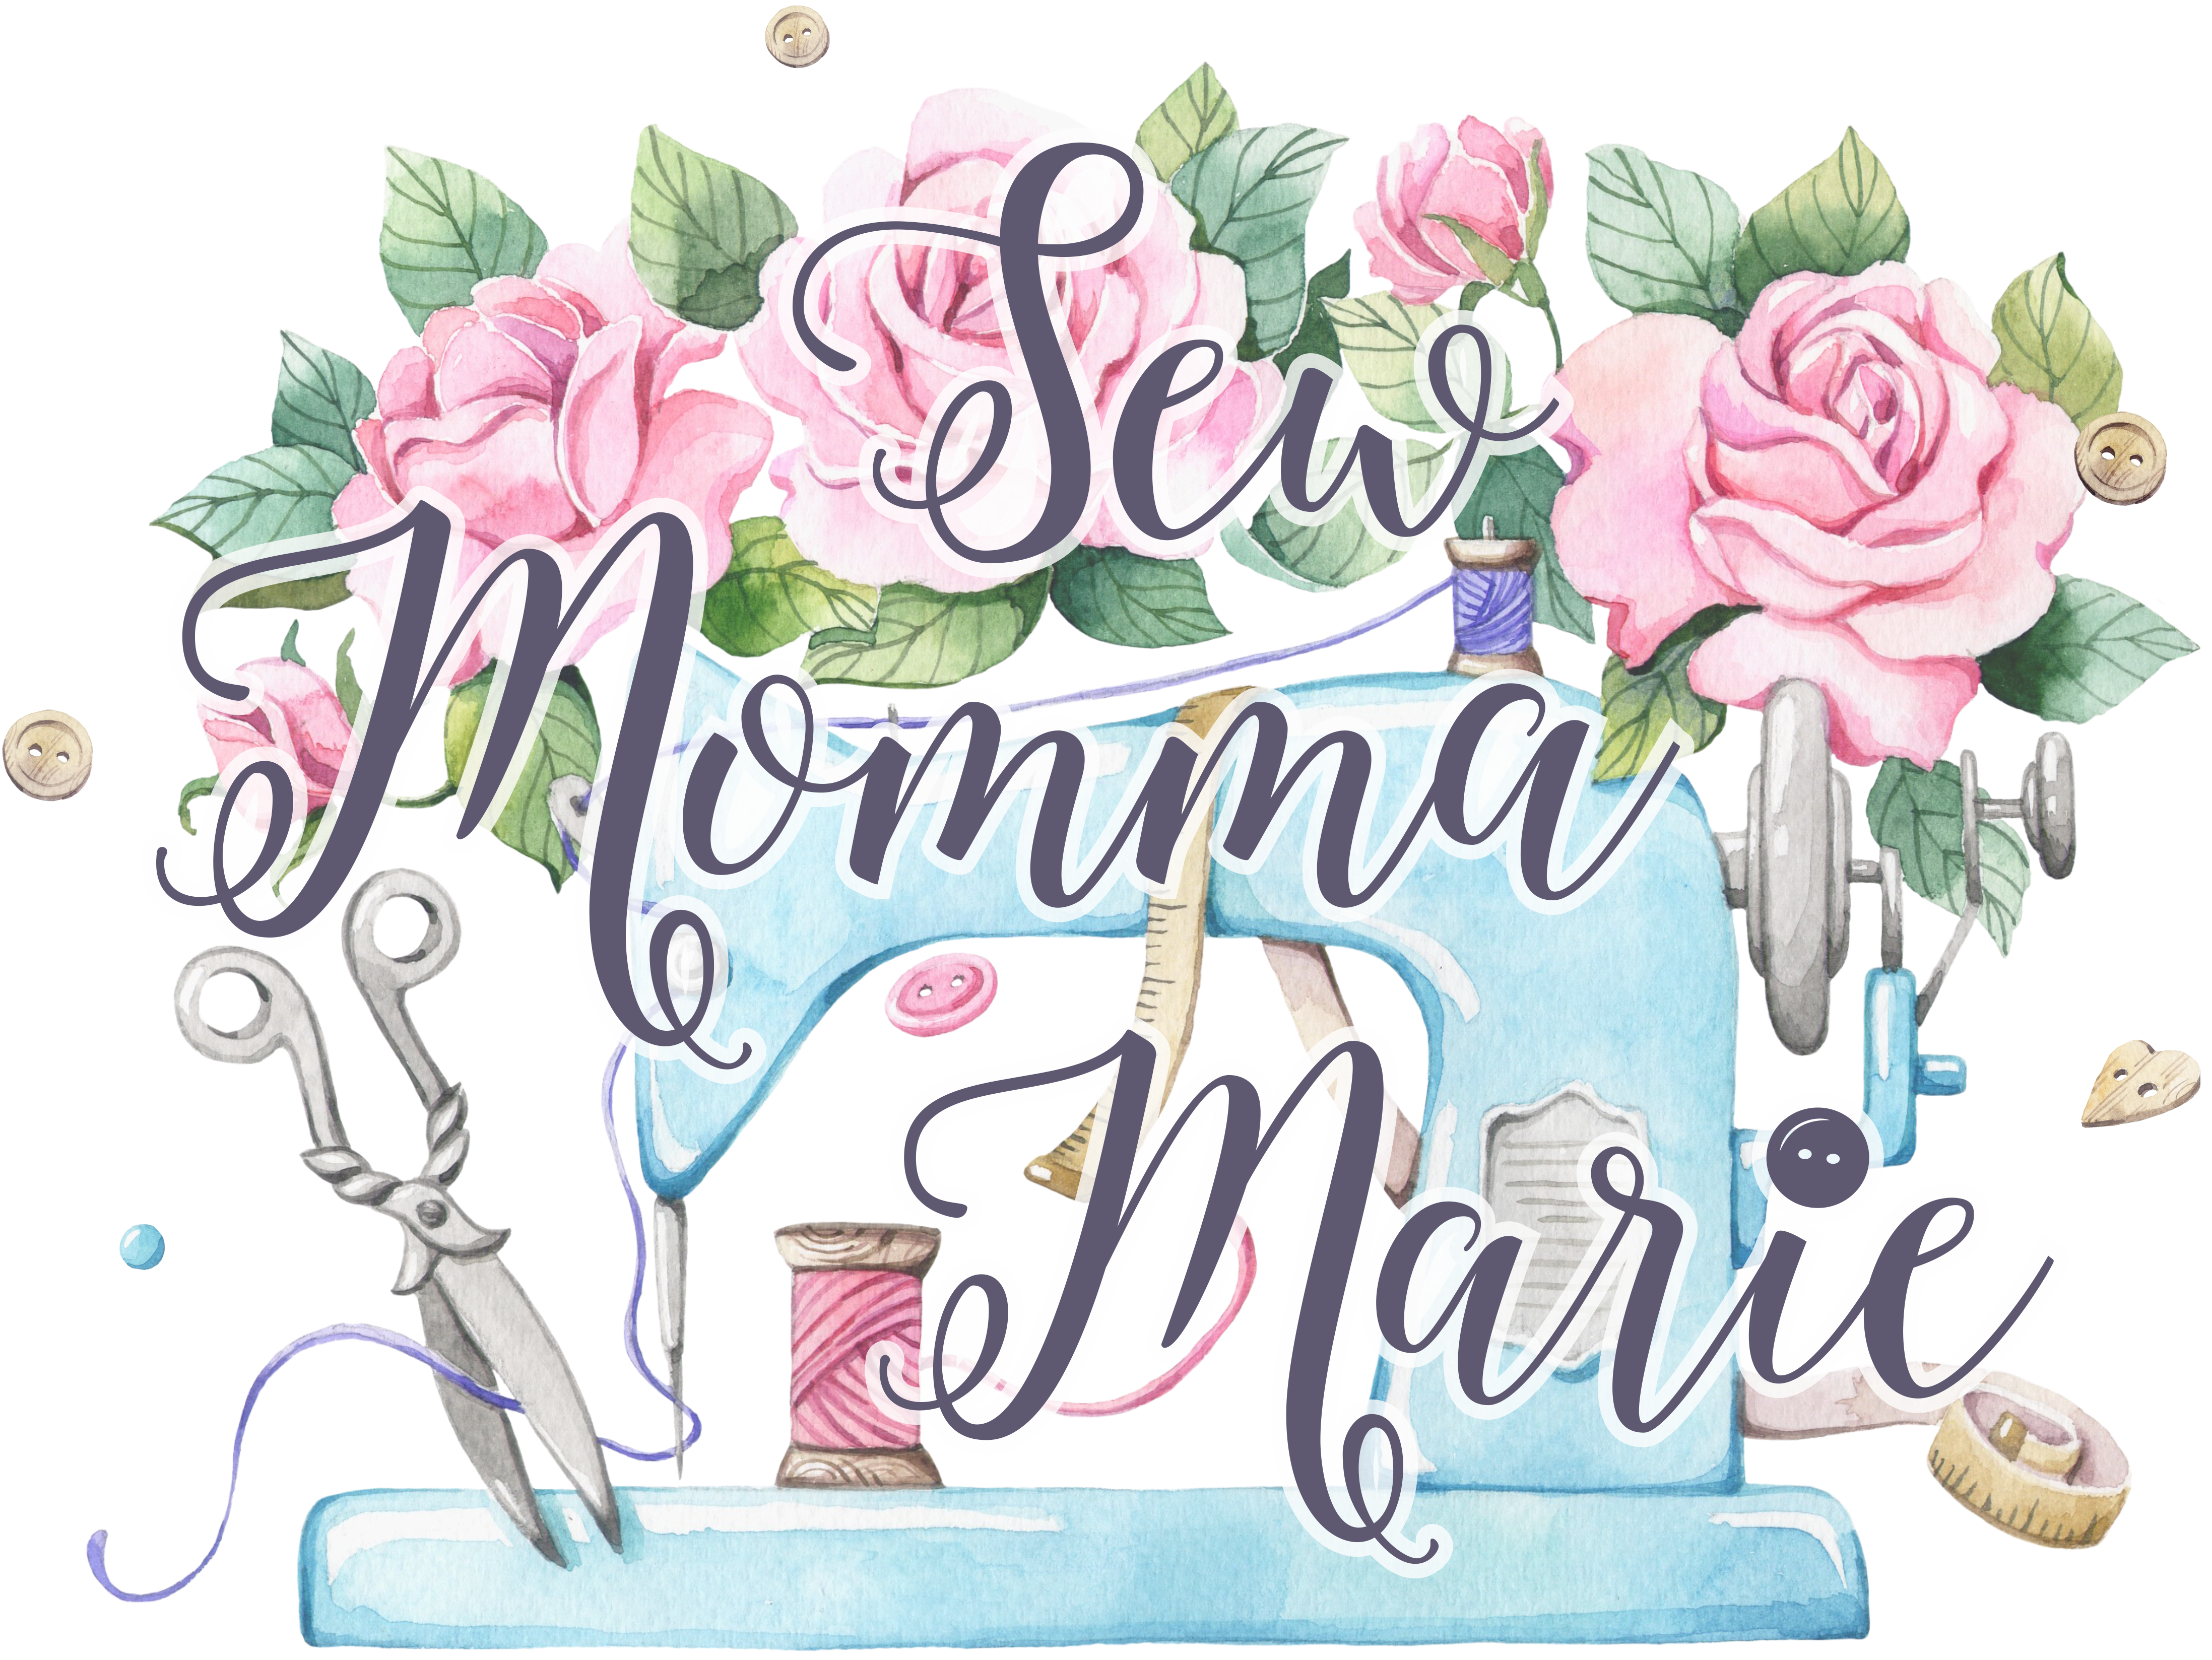 Sew Momma Marie - Personalize Everything!